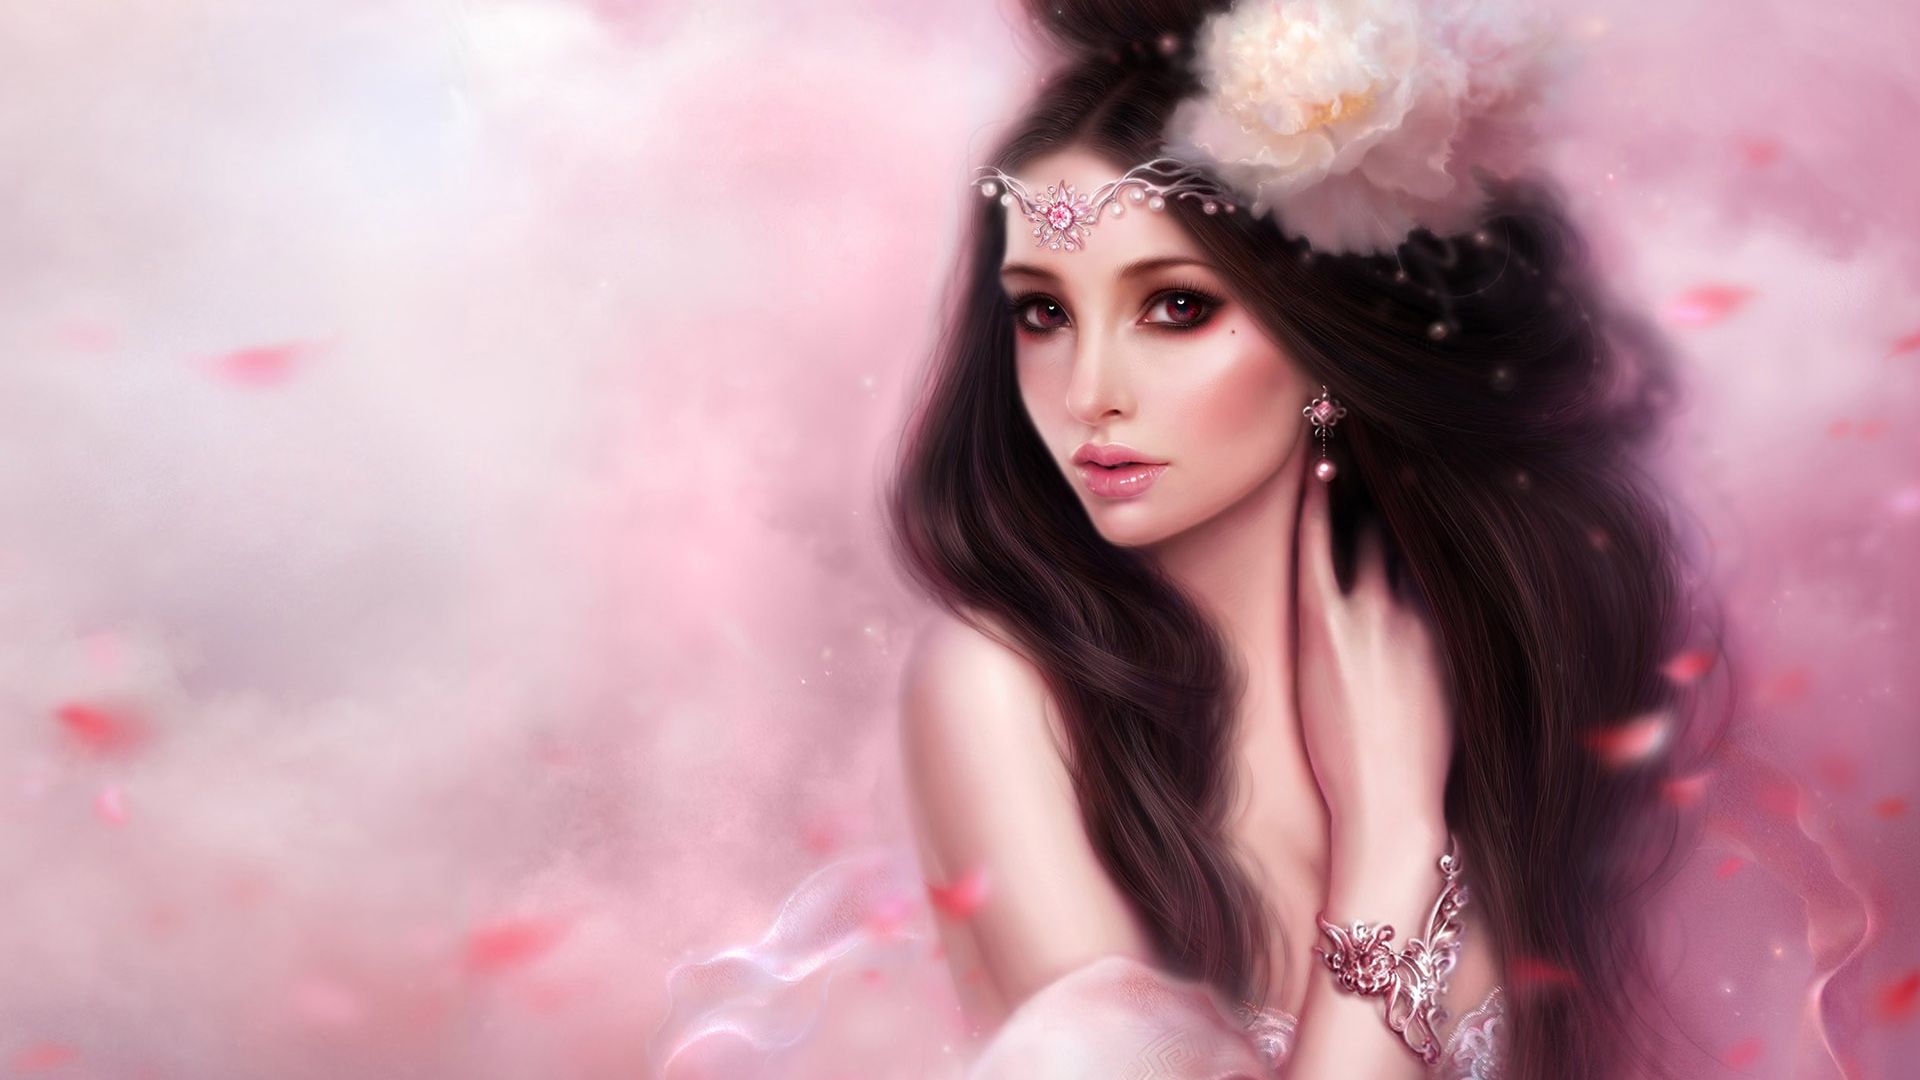 1920x1080 Wallpaper Pink Fantasy Girl 1920x1200 Hd Picture Image